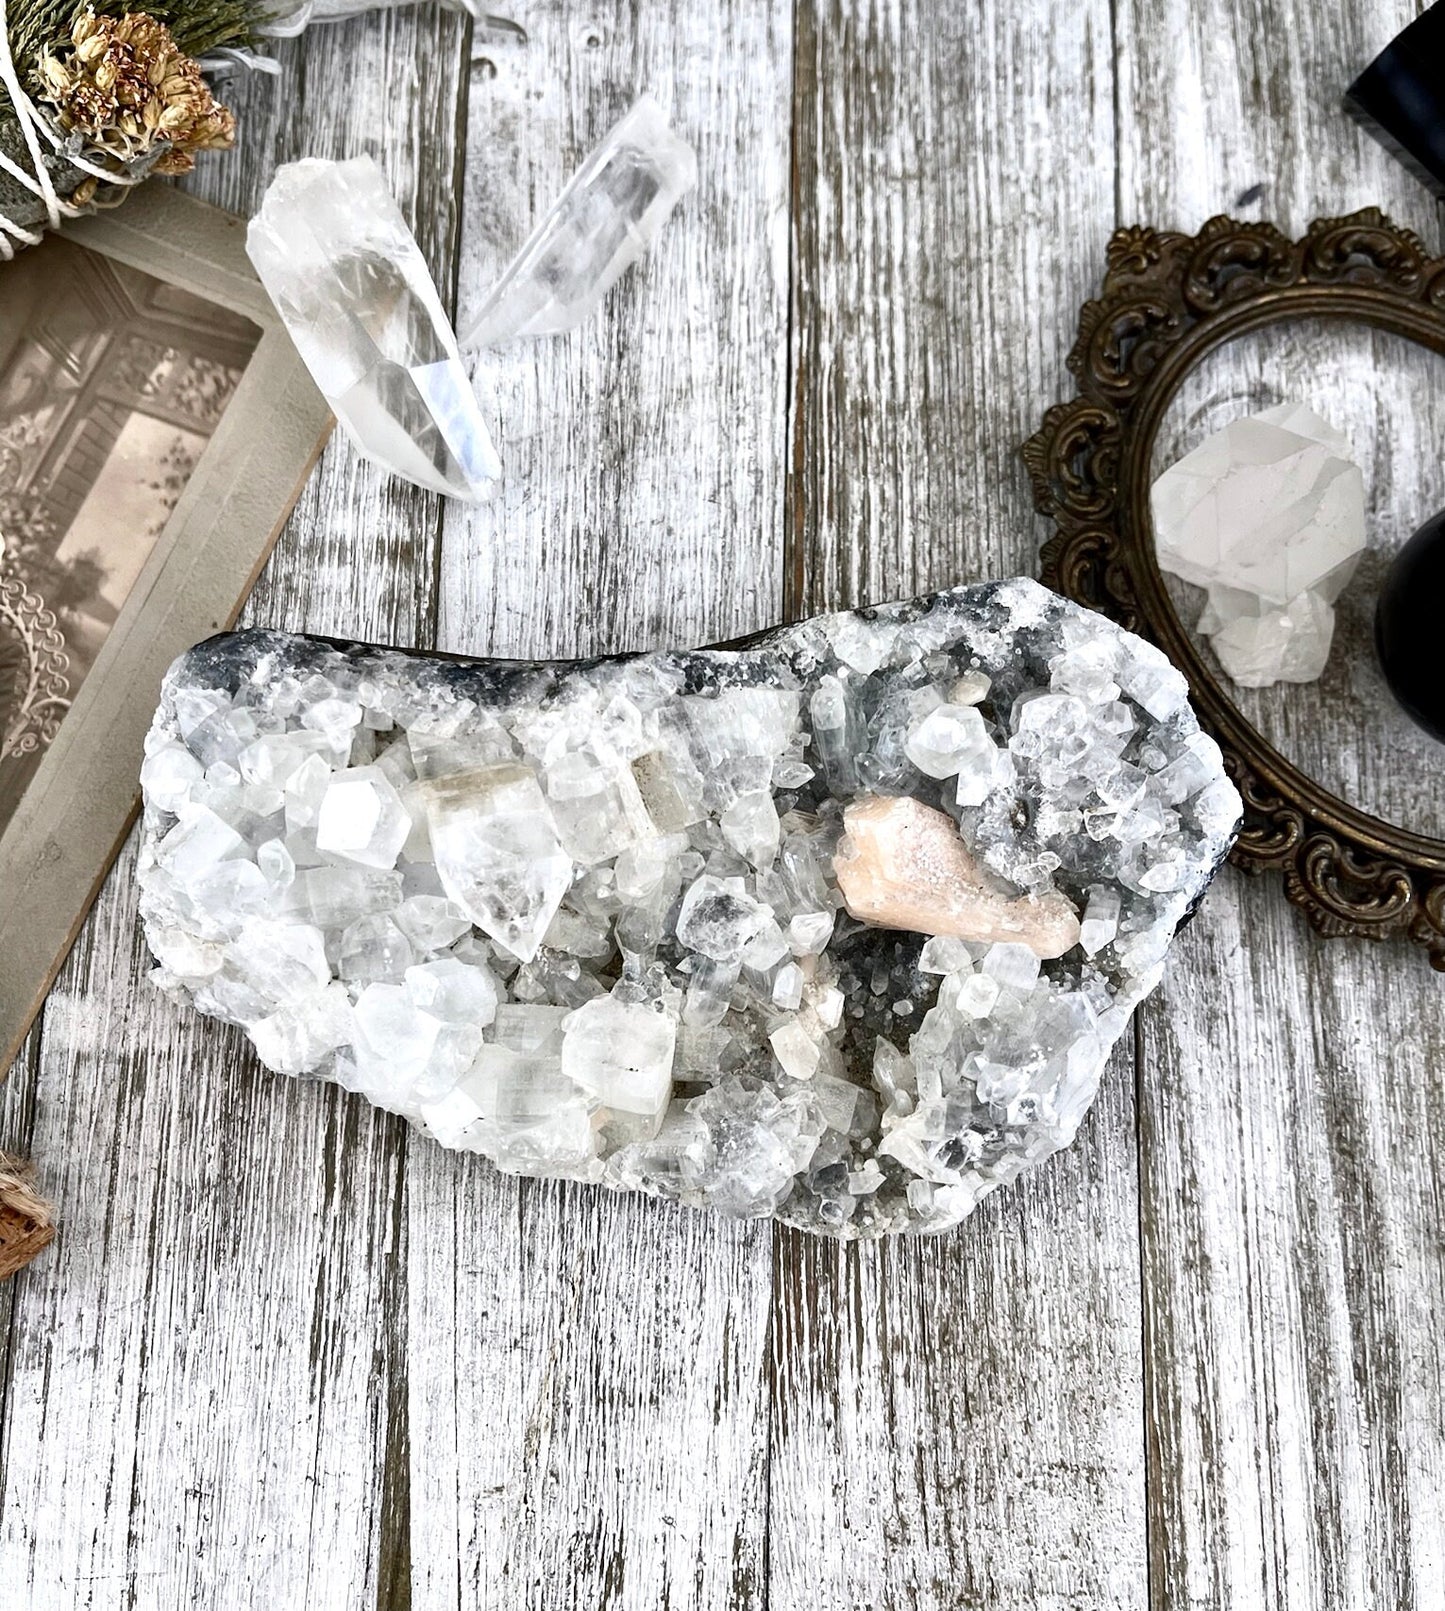 Apophyllite, Big Crystal, Crystal cluster, Crystal Decor, Crystal Geode, Crystal Point, Crystal Sphere, Crystals, Etsy ID: 1590710827, healing crystals, Home & Living, Home Decor, large crystal, raw crystal, Rocks & Geodes